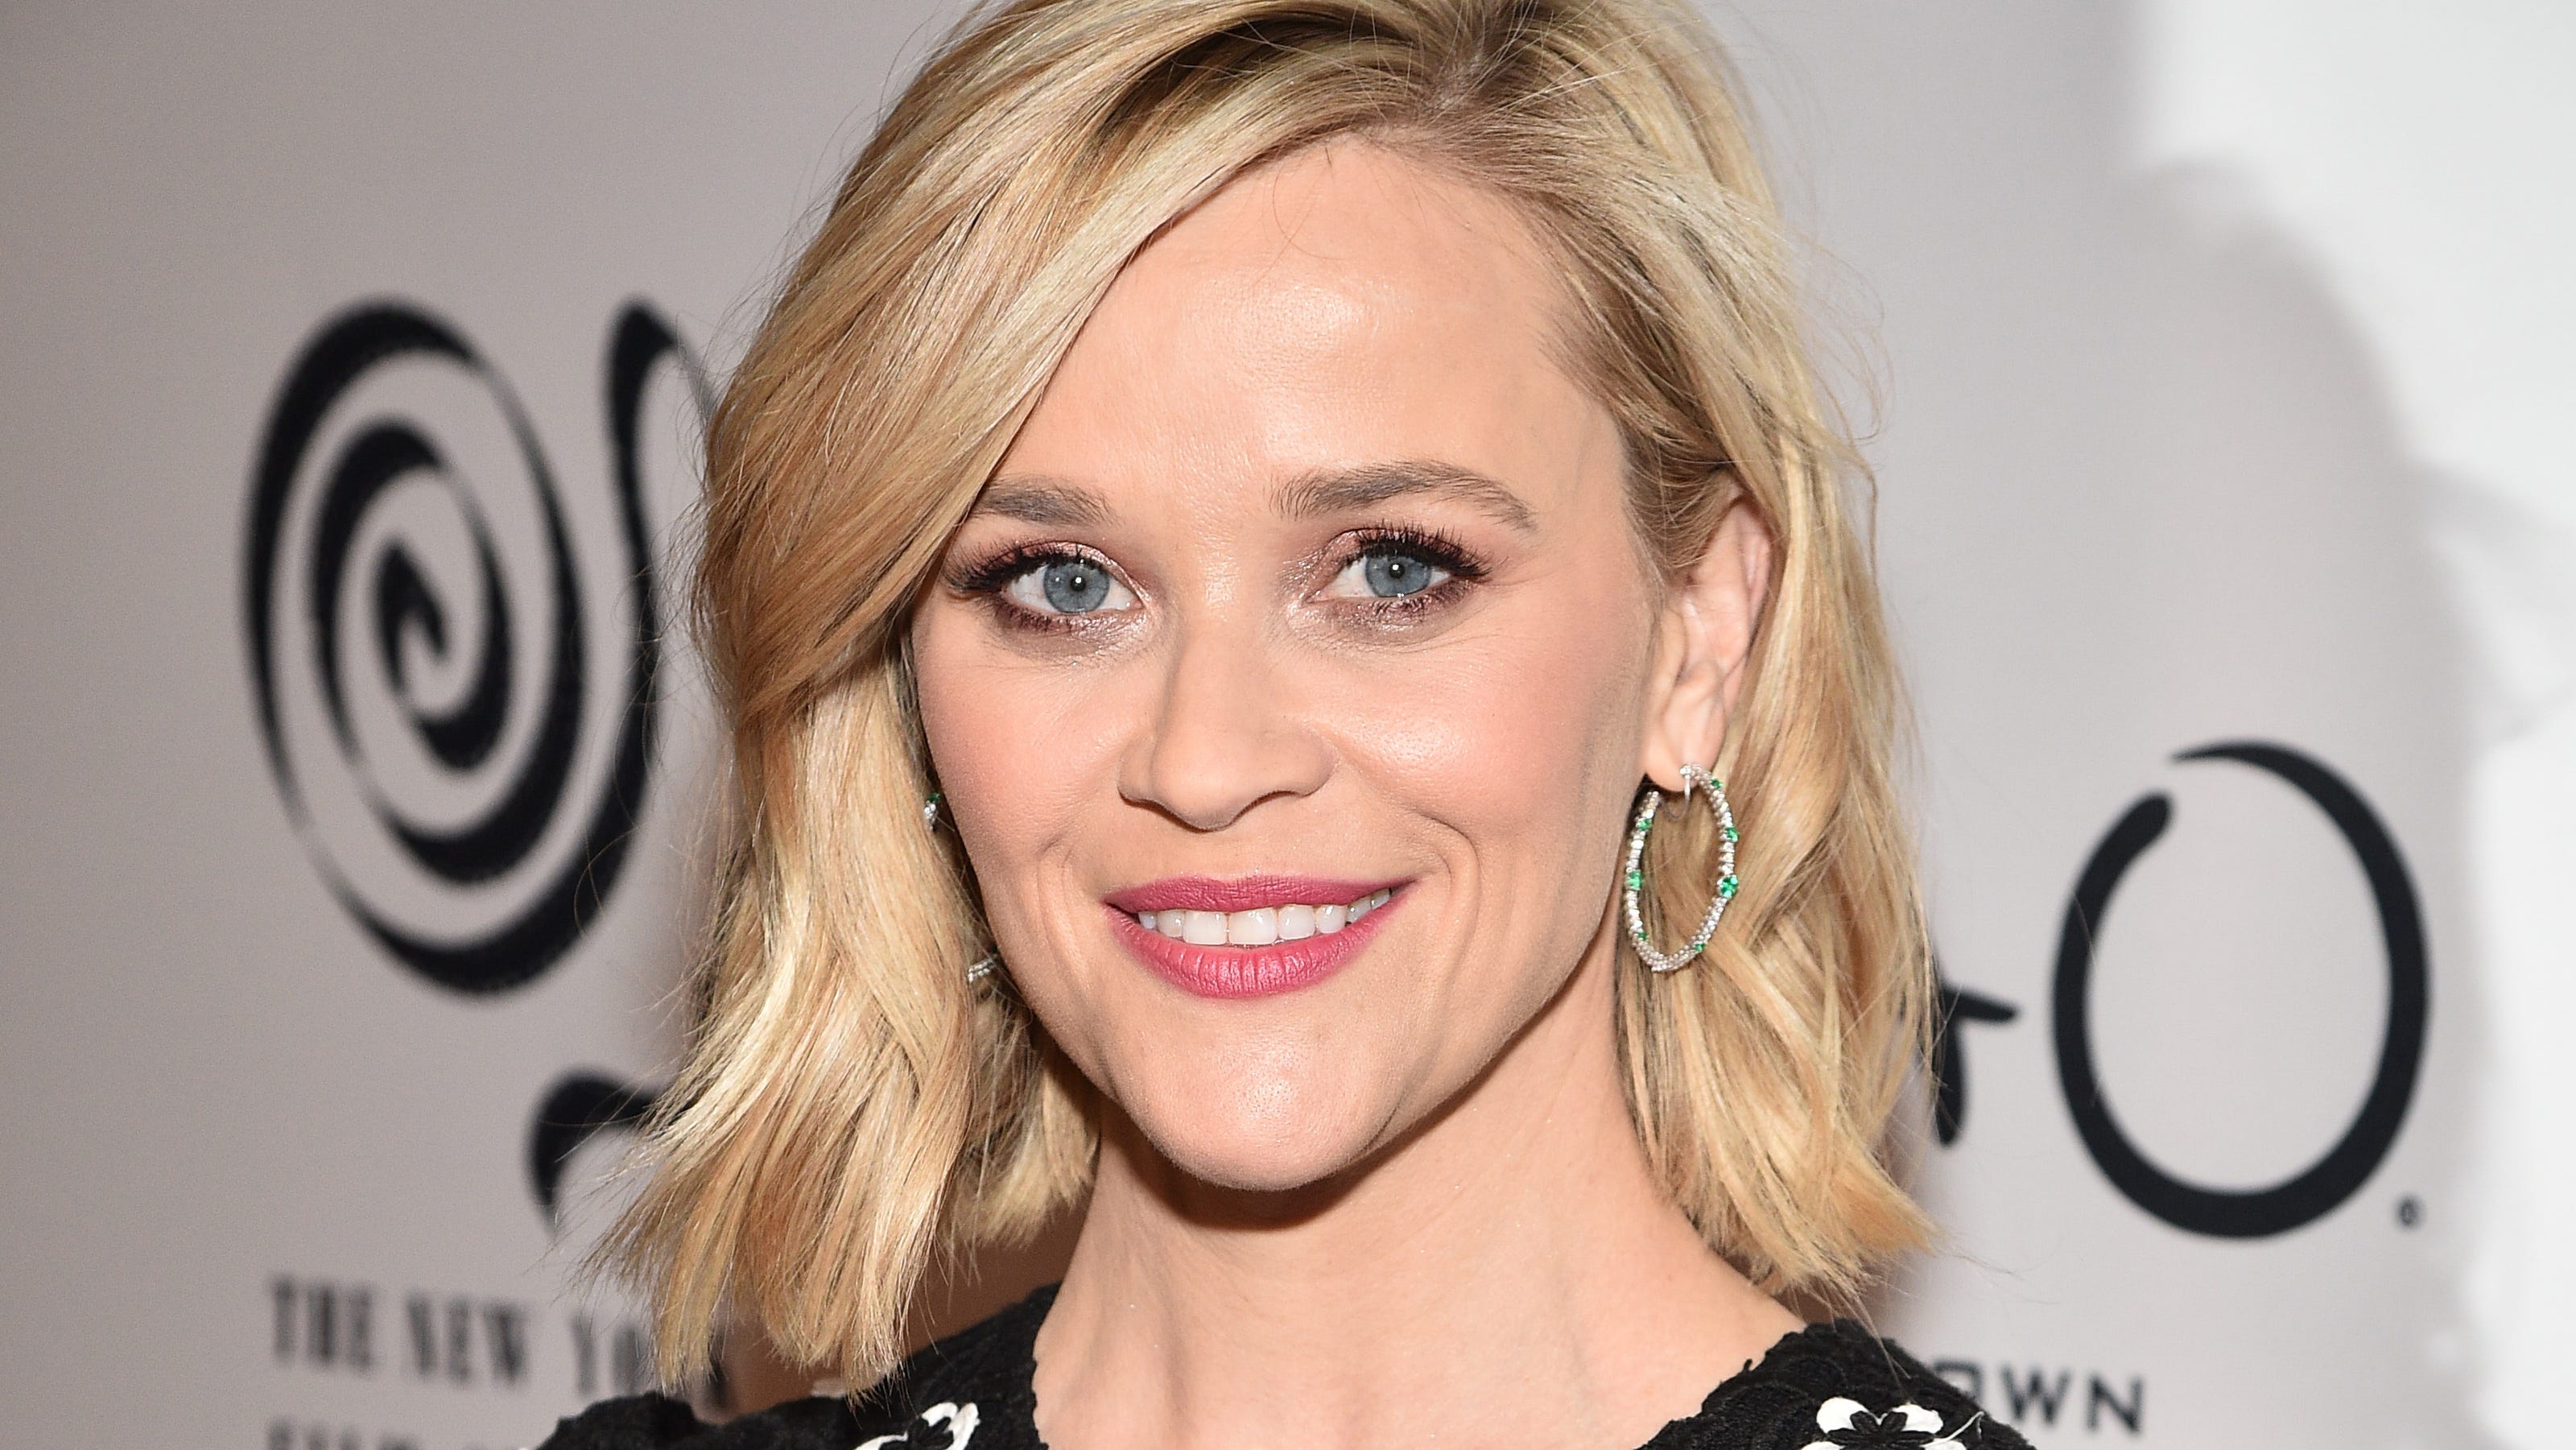 Reese Witherspoon: Hello Sunshine sold in Blackstone-backed venture